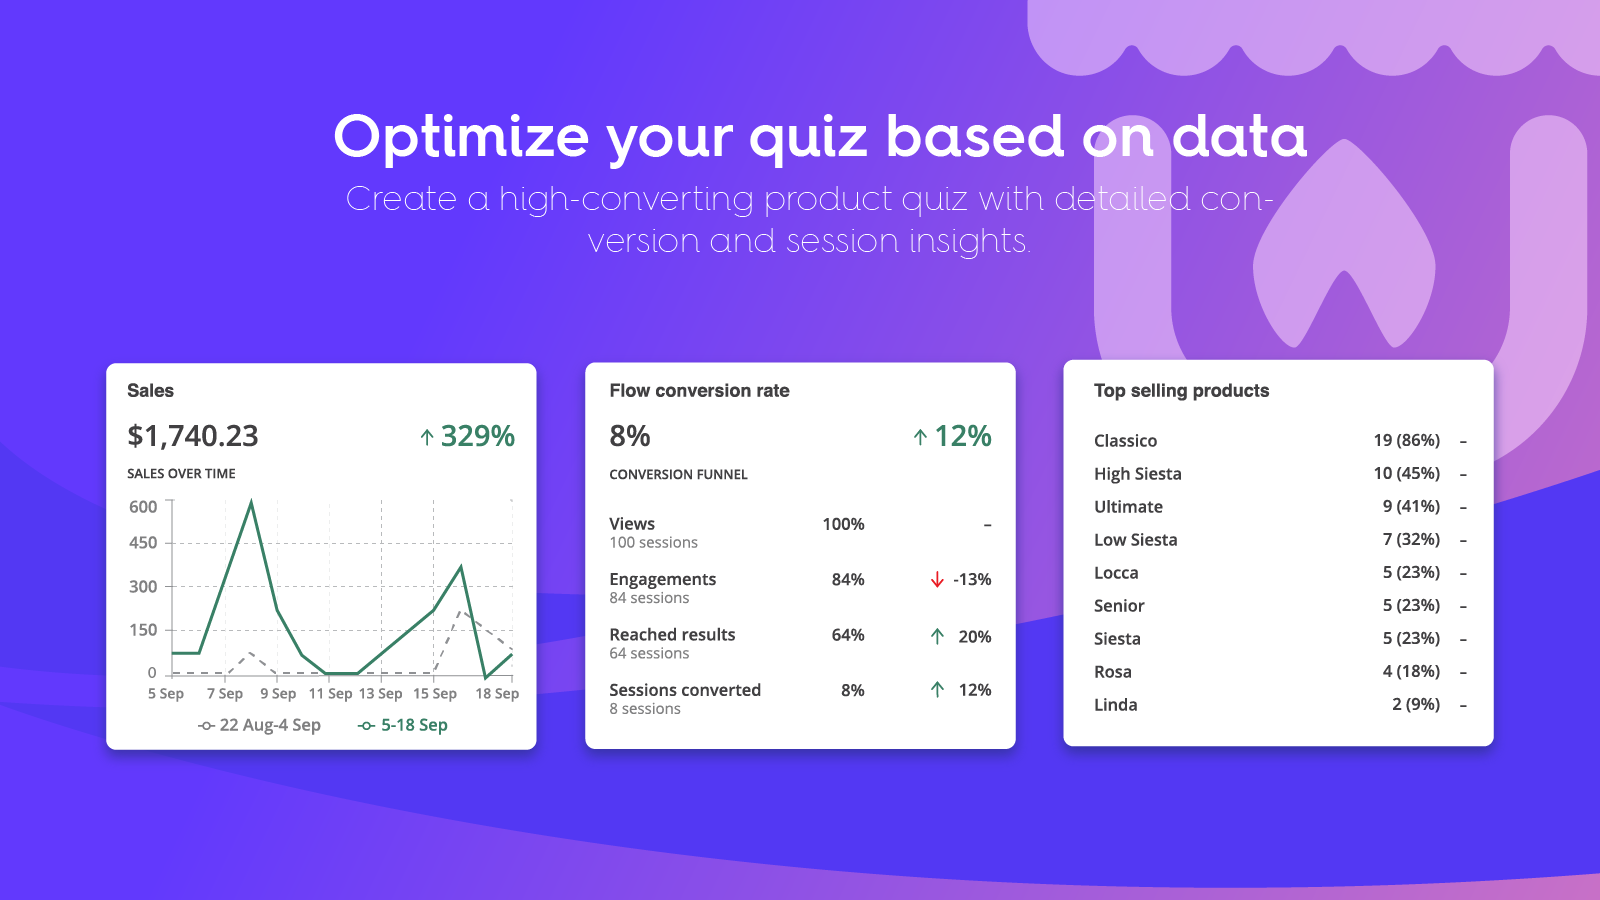 Optimize your quiz based on data 